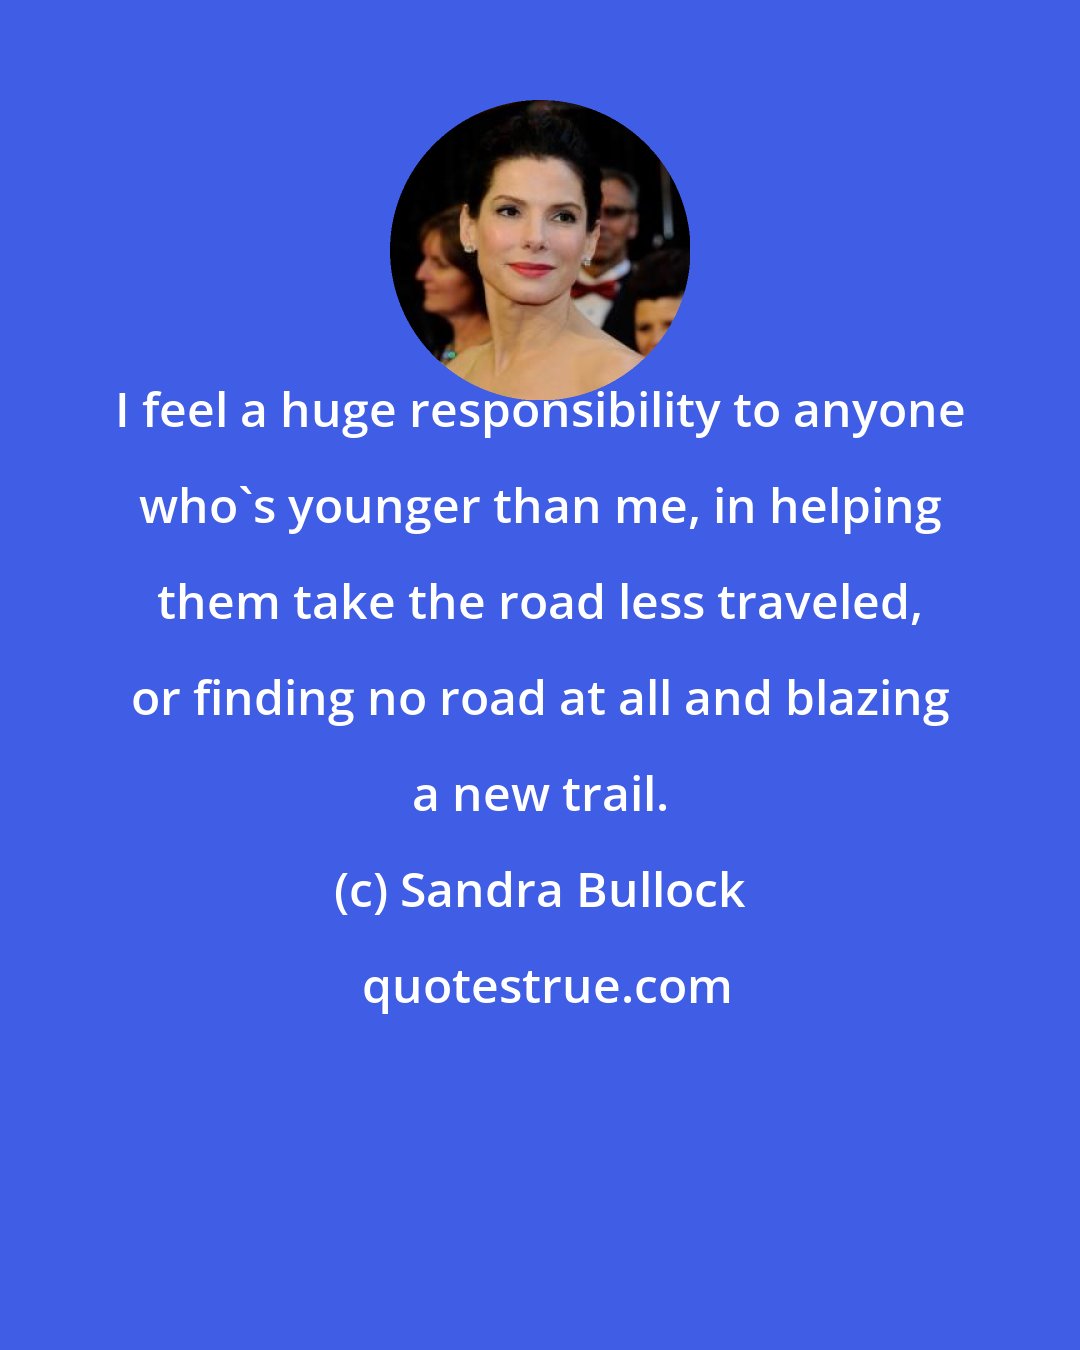 Sandra Bullock: I feel a huge responsibility to anyone who's younger than me, in helping them take the road less traveled, or finding no road at all and blazing a new trail.